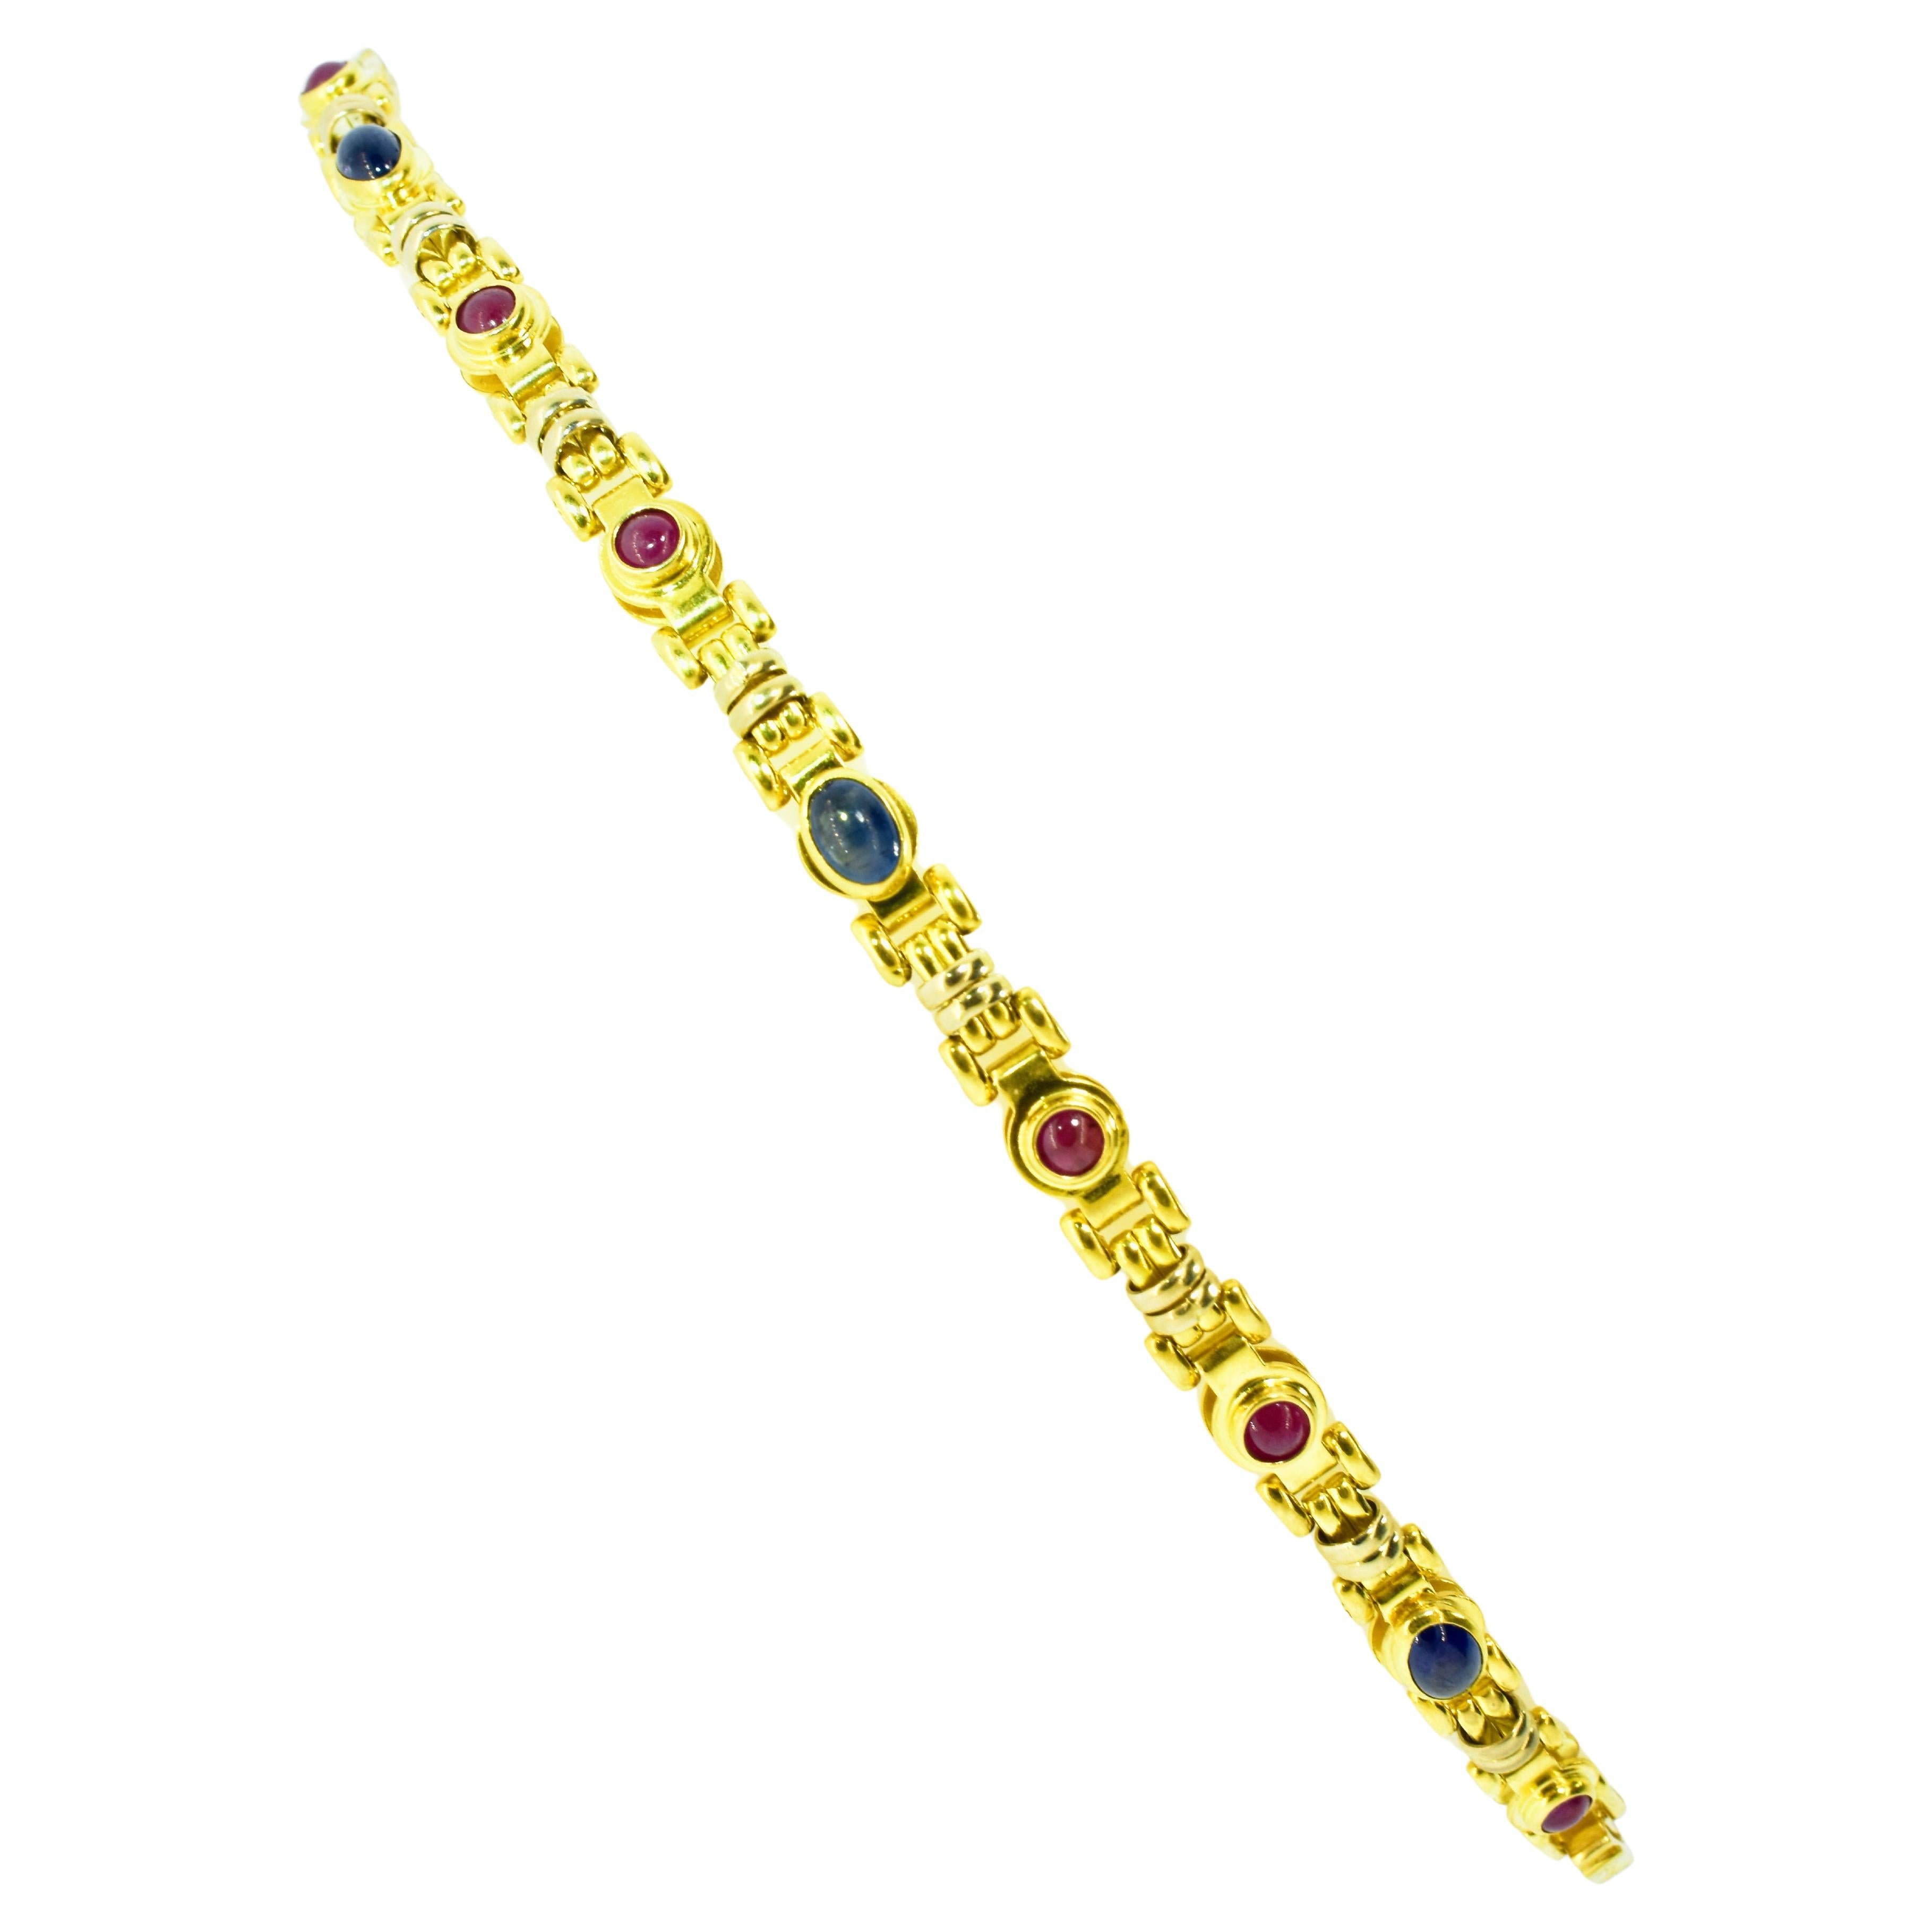 18K Bracelet with Sapphires and Rubies, Flexible and Unusual Complex Link. For Sale